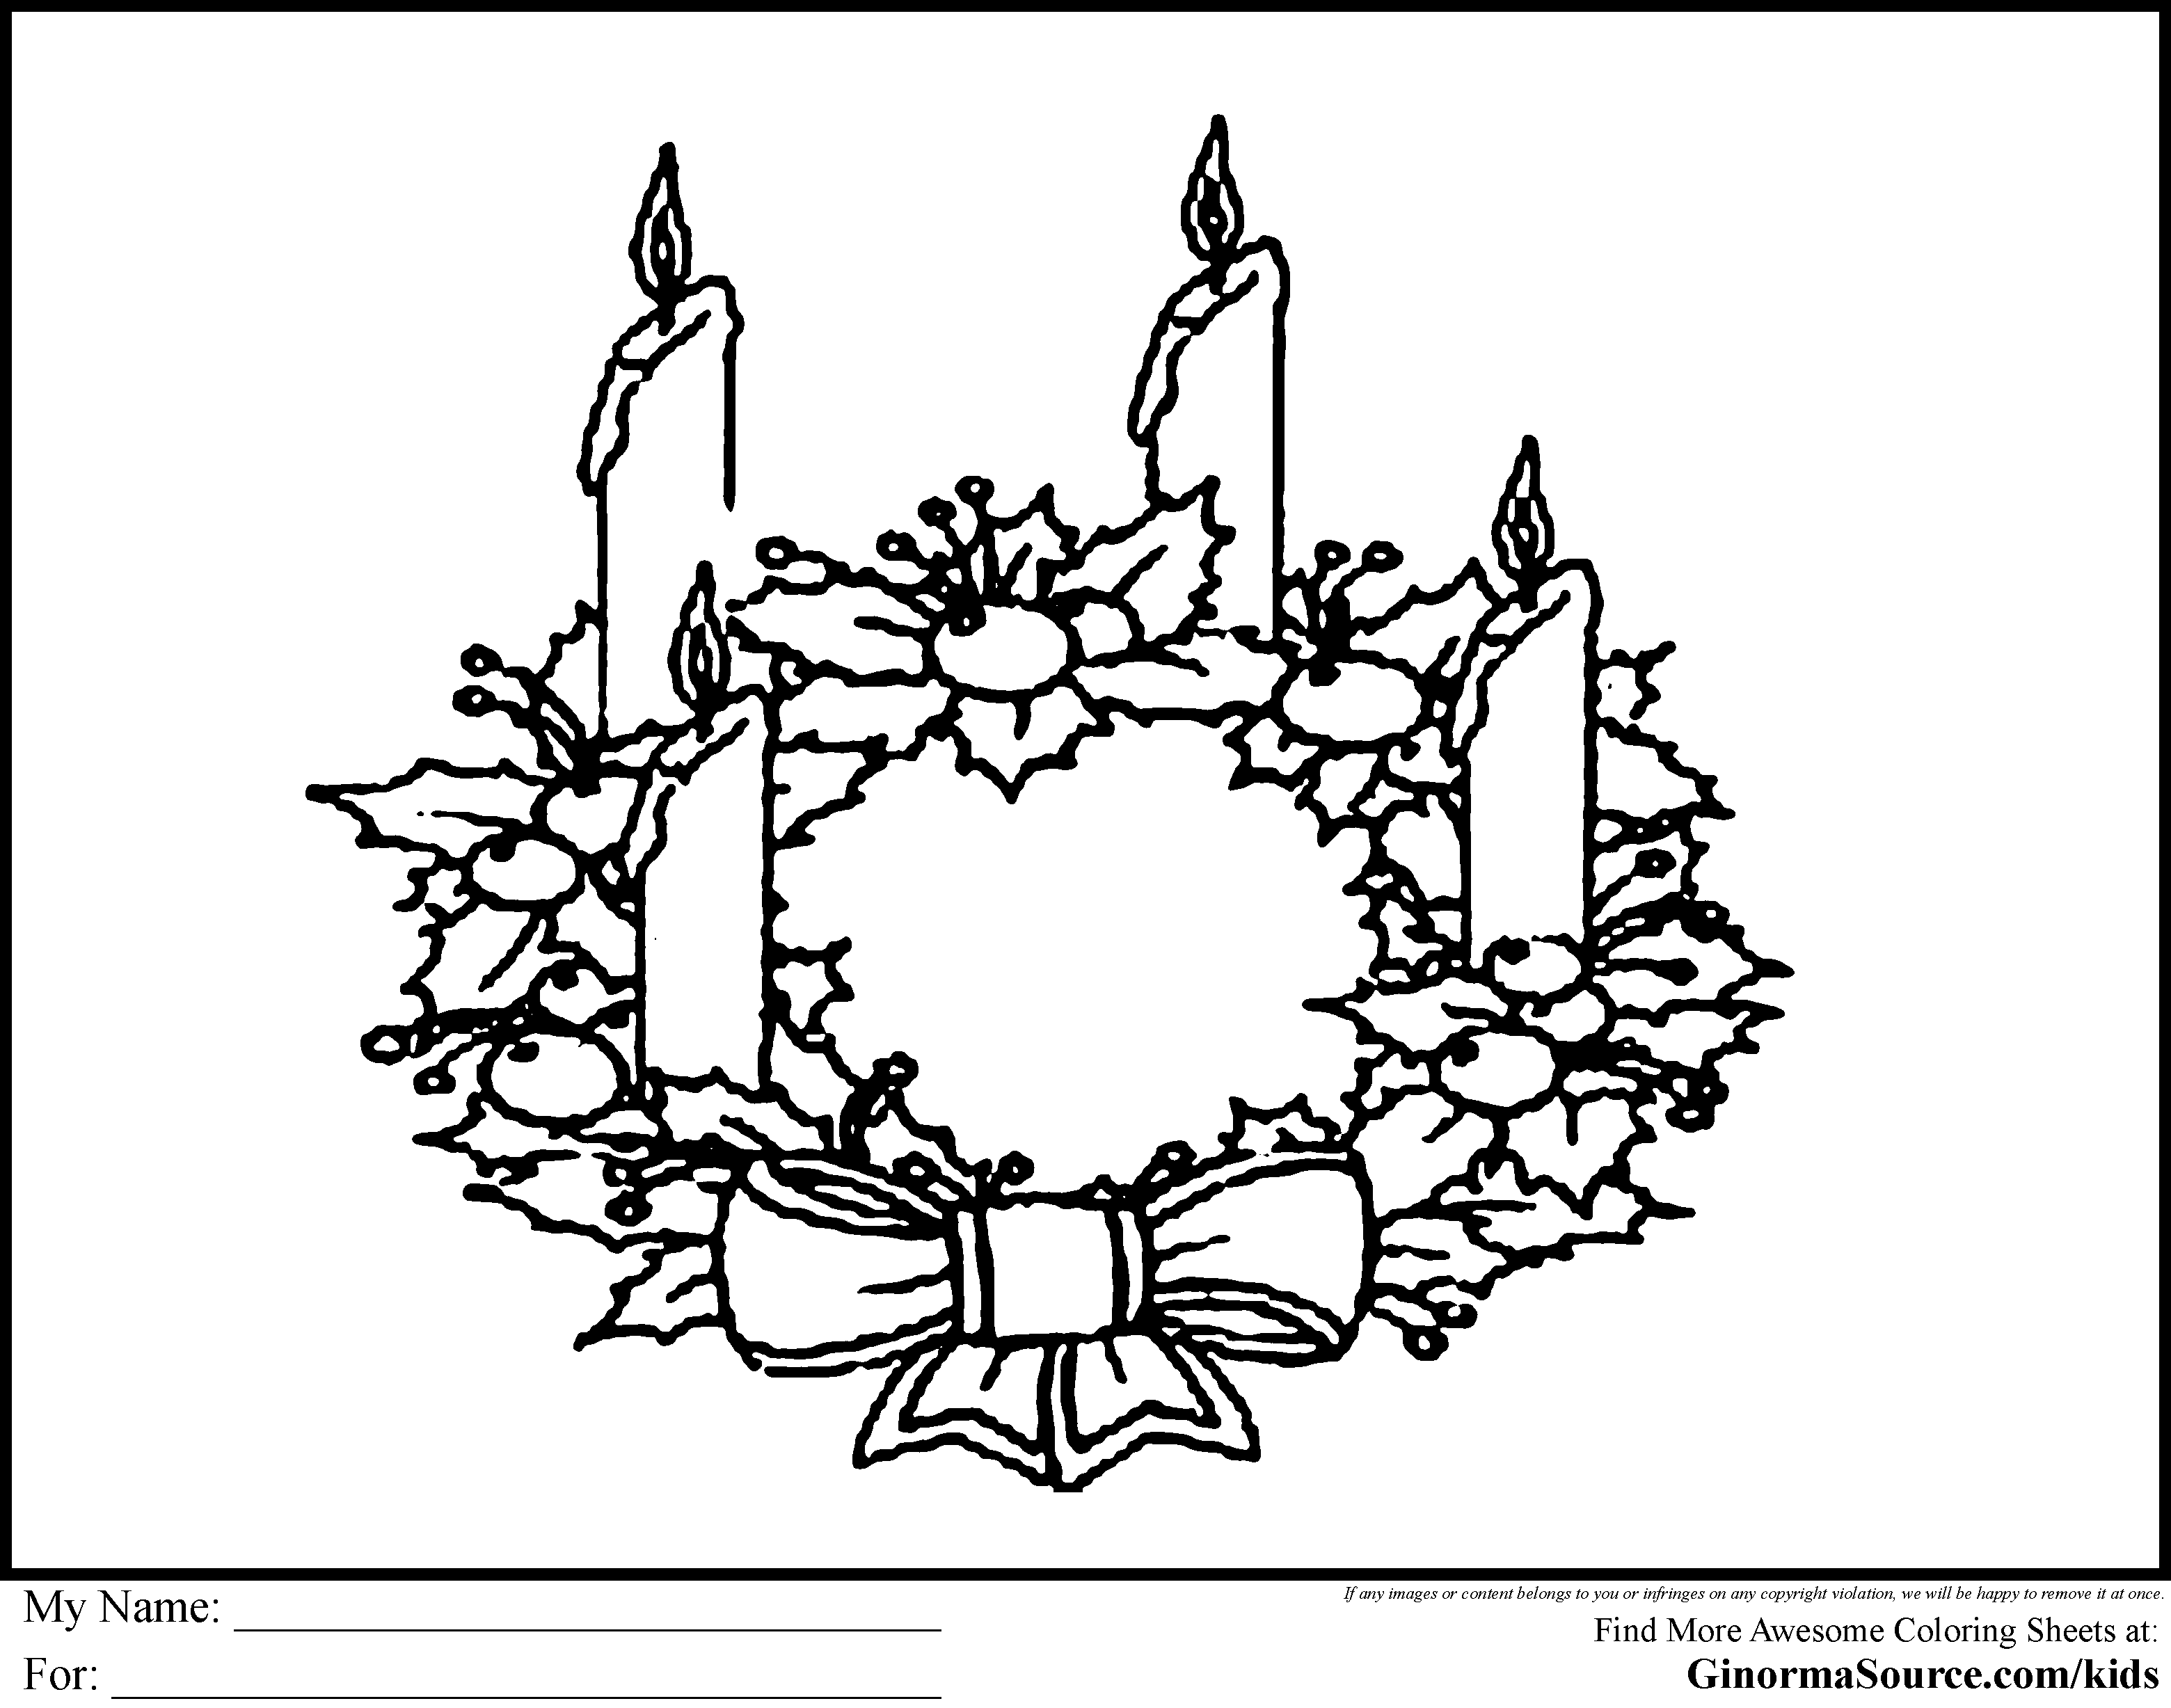 Advent clipart happy. Free wreath cliparts download